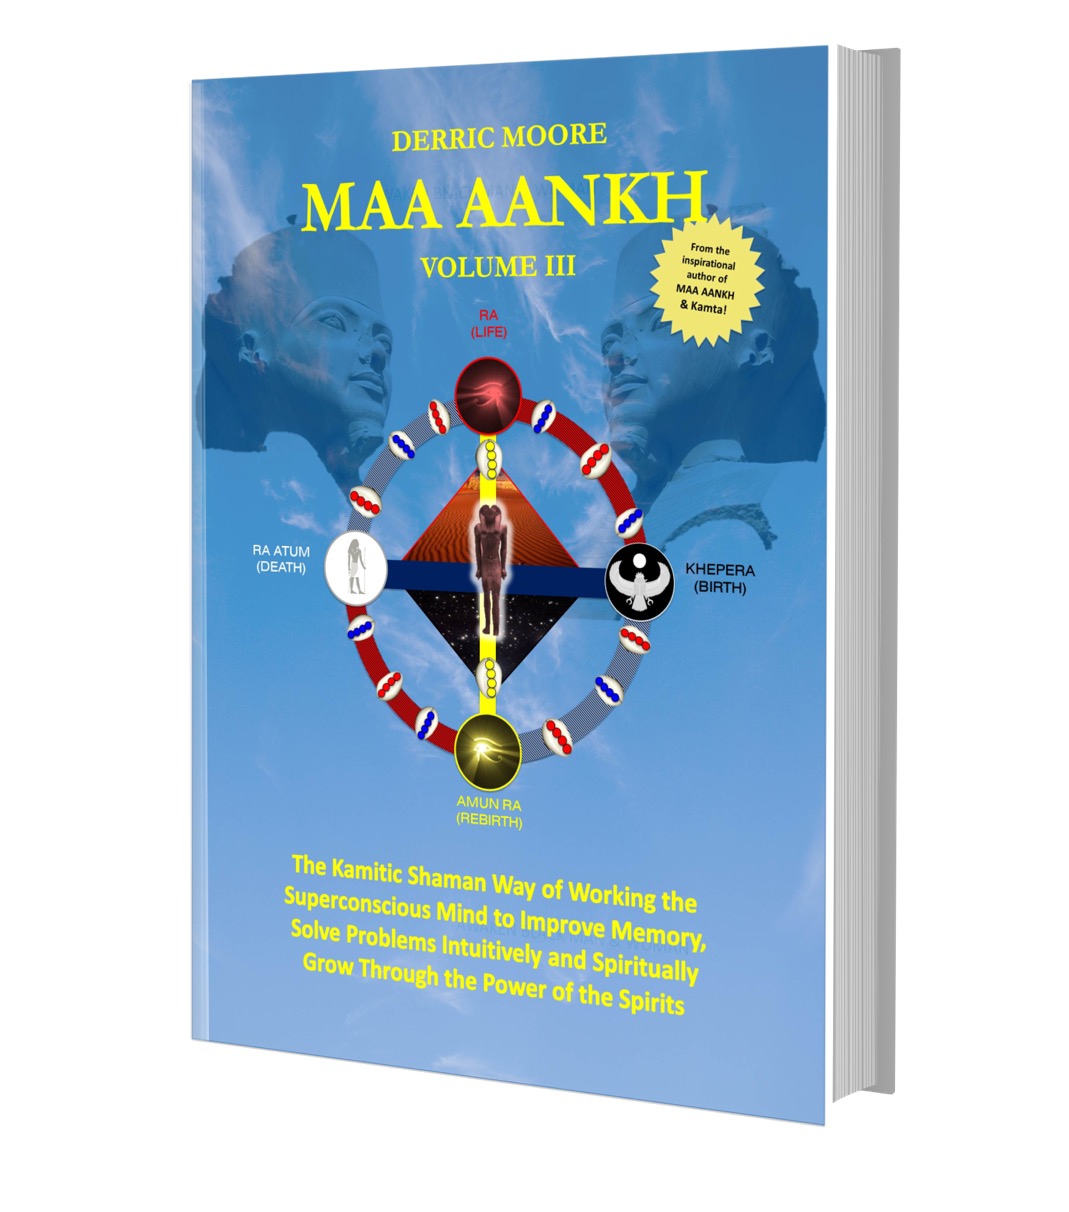 MAA AANKH Volume III: The Kamitic Shaman Way of Working the Superconscious Mind to Improve Memory, Solve Problems Intuitively